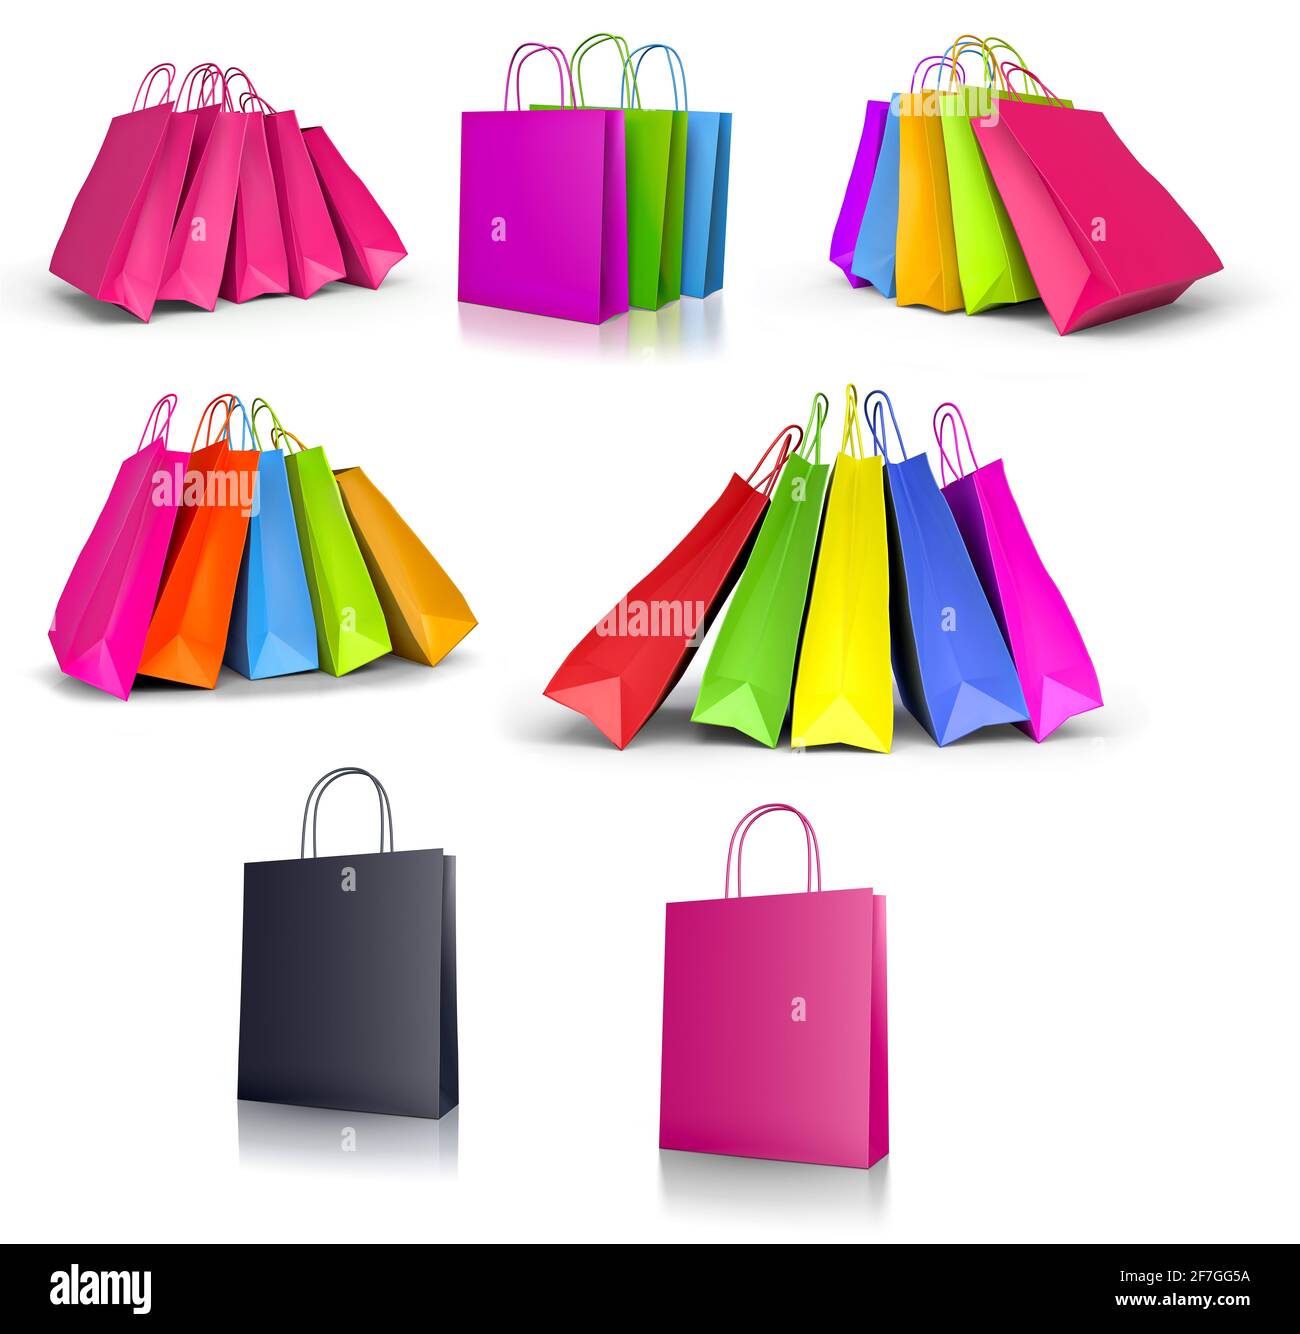 Colored paper shopping bags set on white background. 3D Illustration Stock Photo